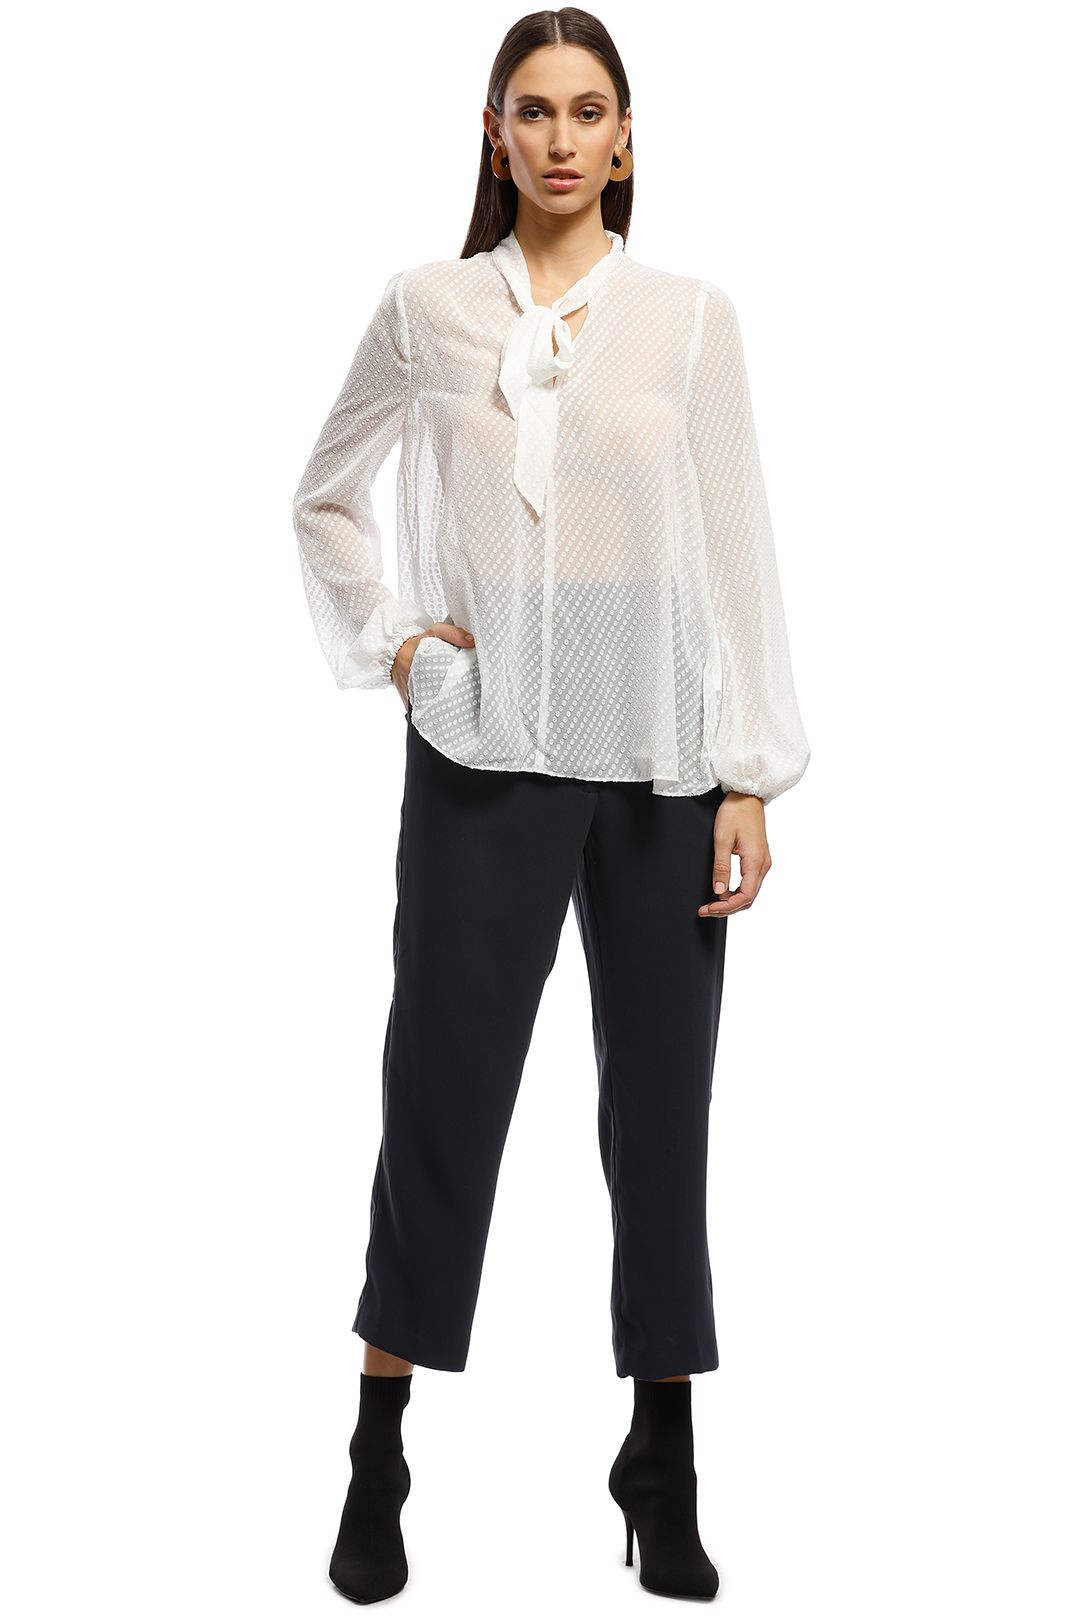 Cooper St - Love Sprung Top - White - Front